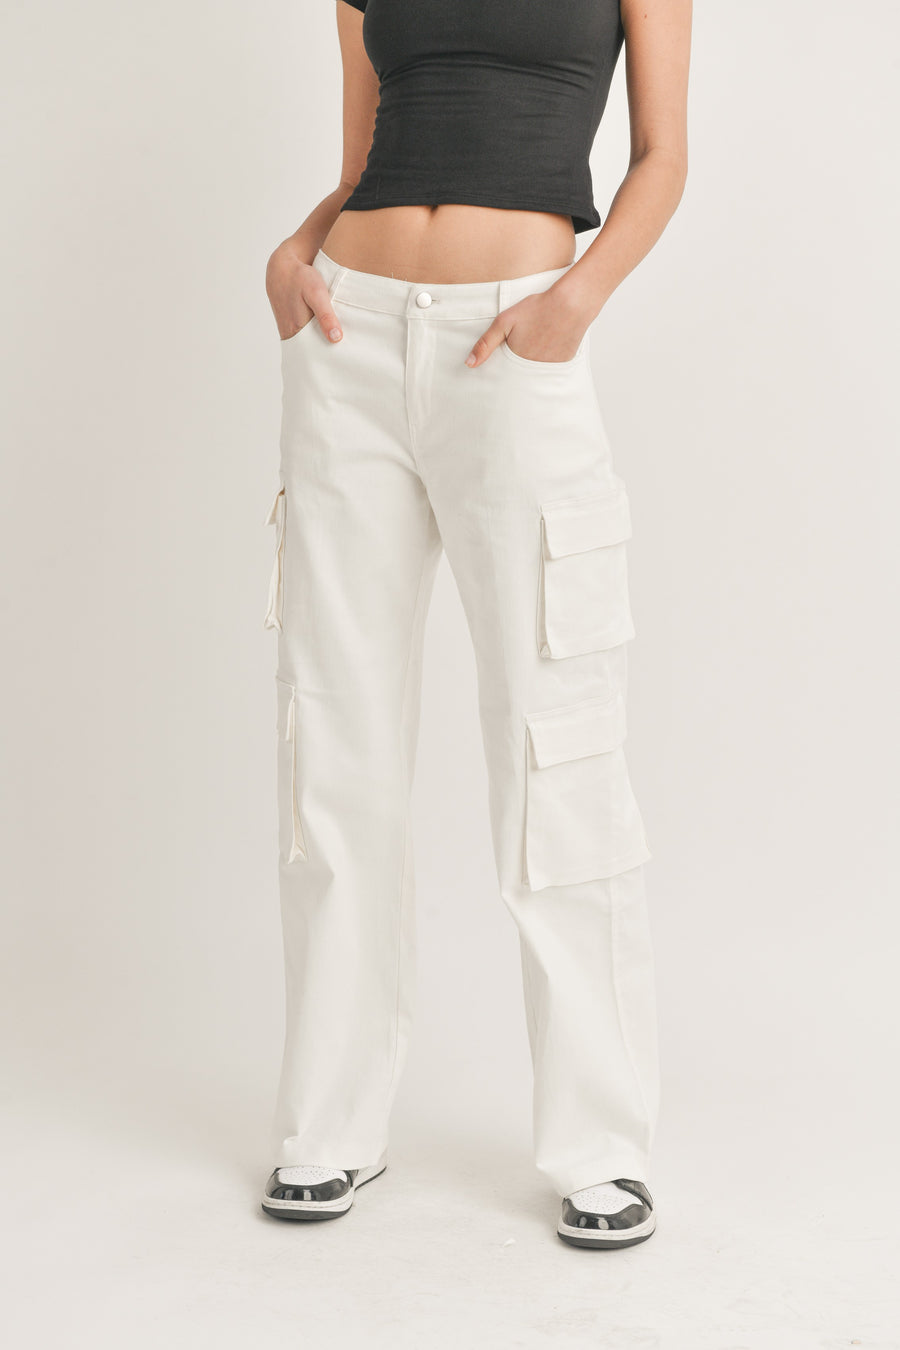 Featuring a straight leg cargo pant with two side pockets on each leg in the color off whte 